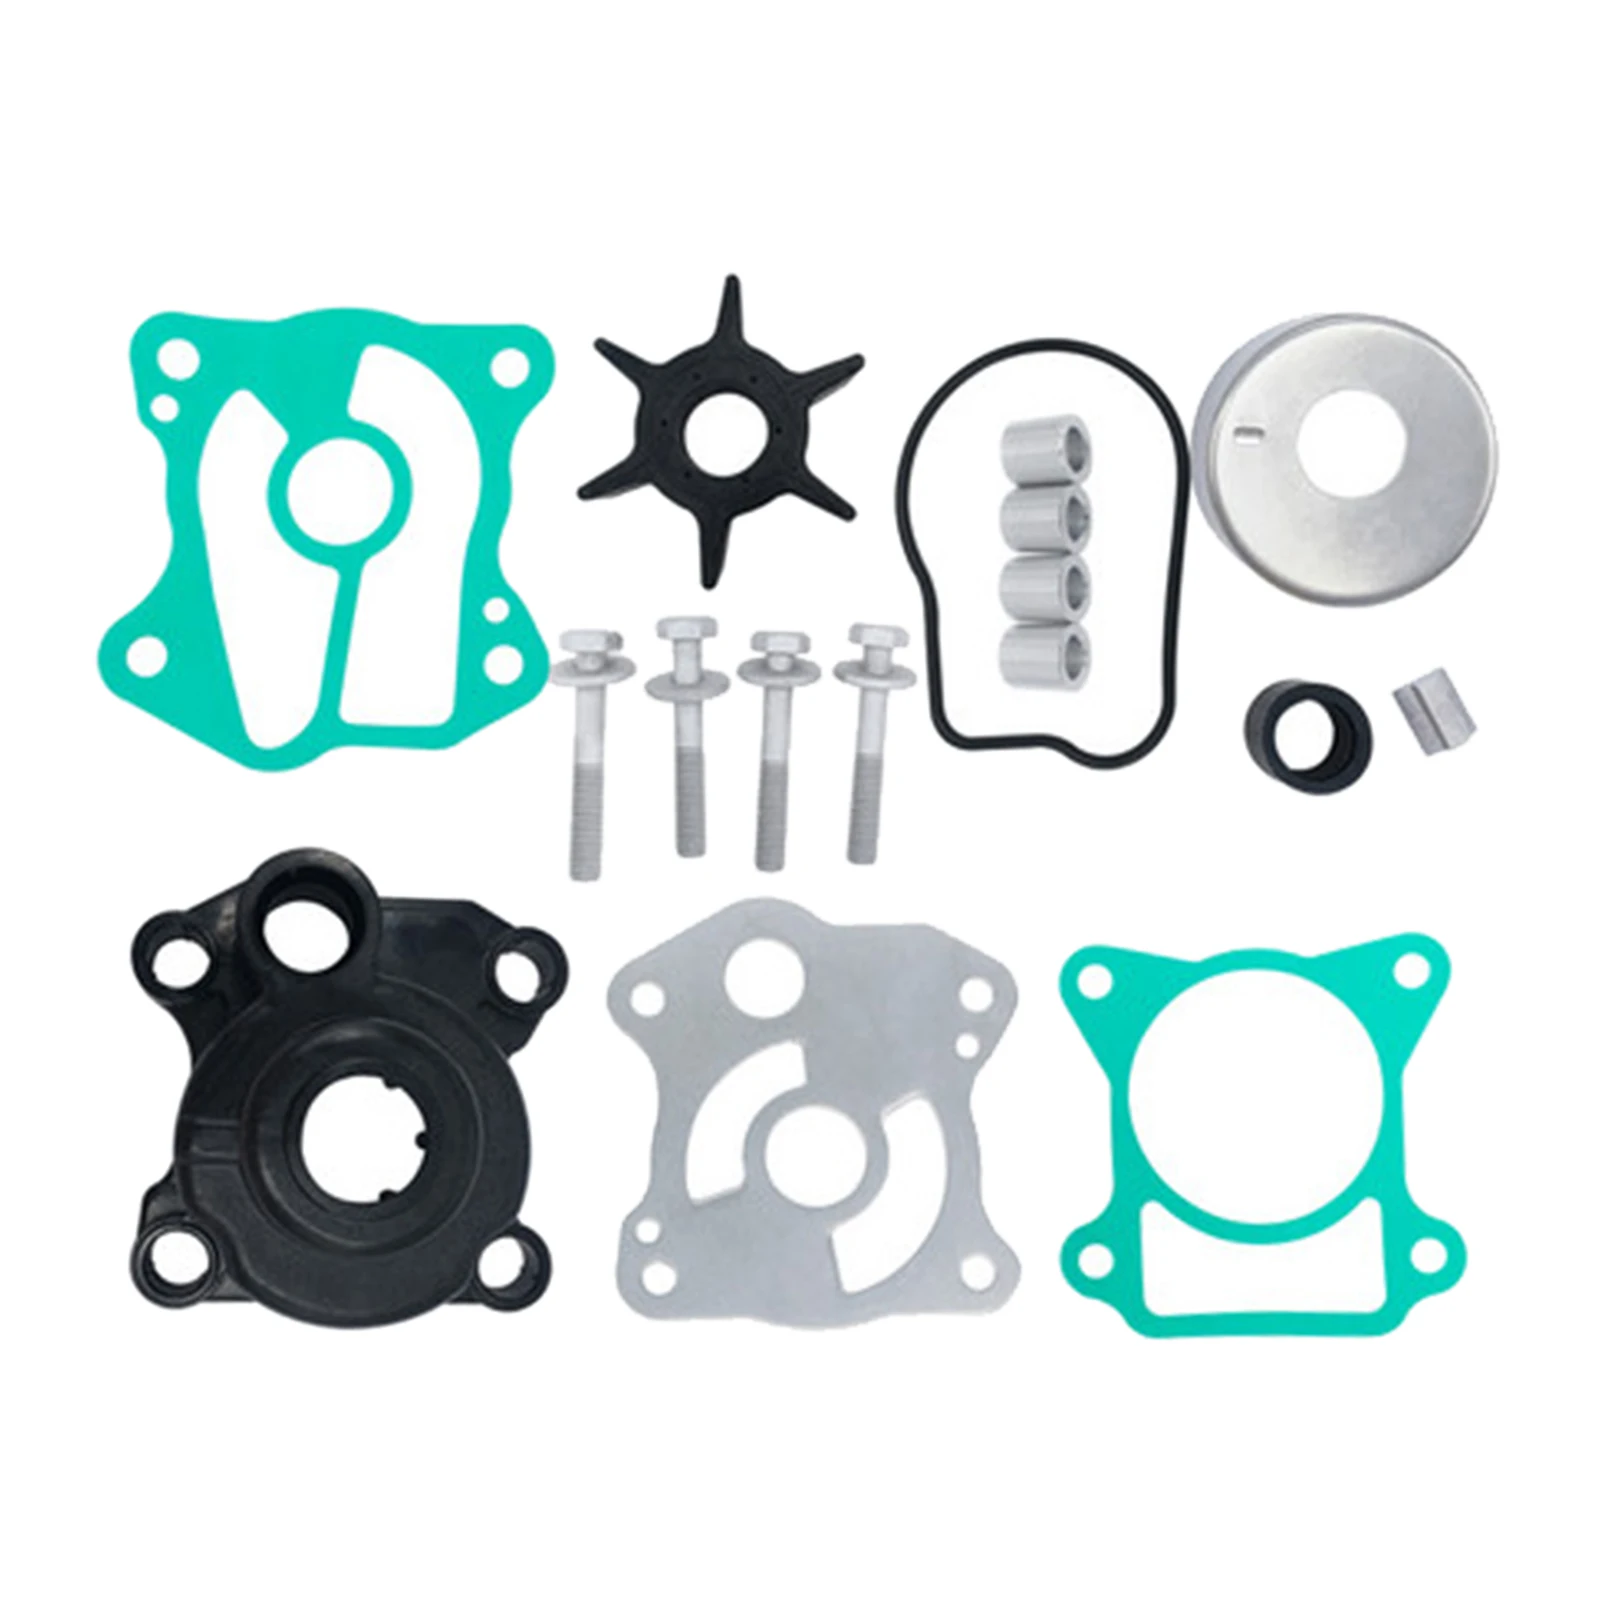 Water Pump Impeller Kit for Honda 40/50 HP BF40A BF40D BF50A BF50D Replace